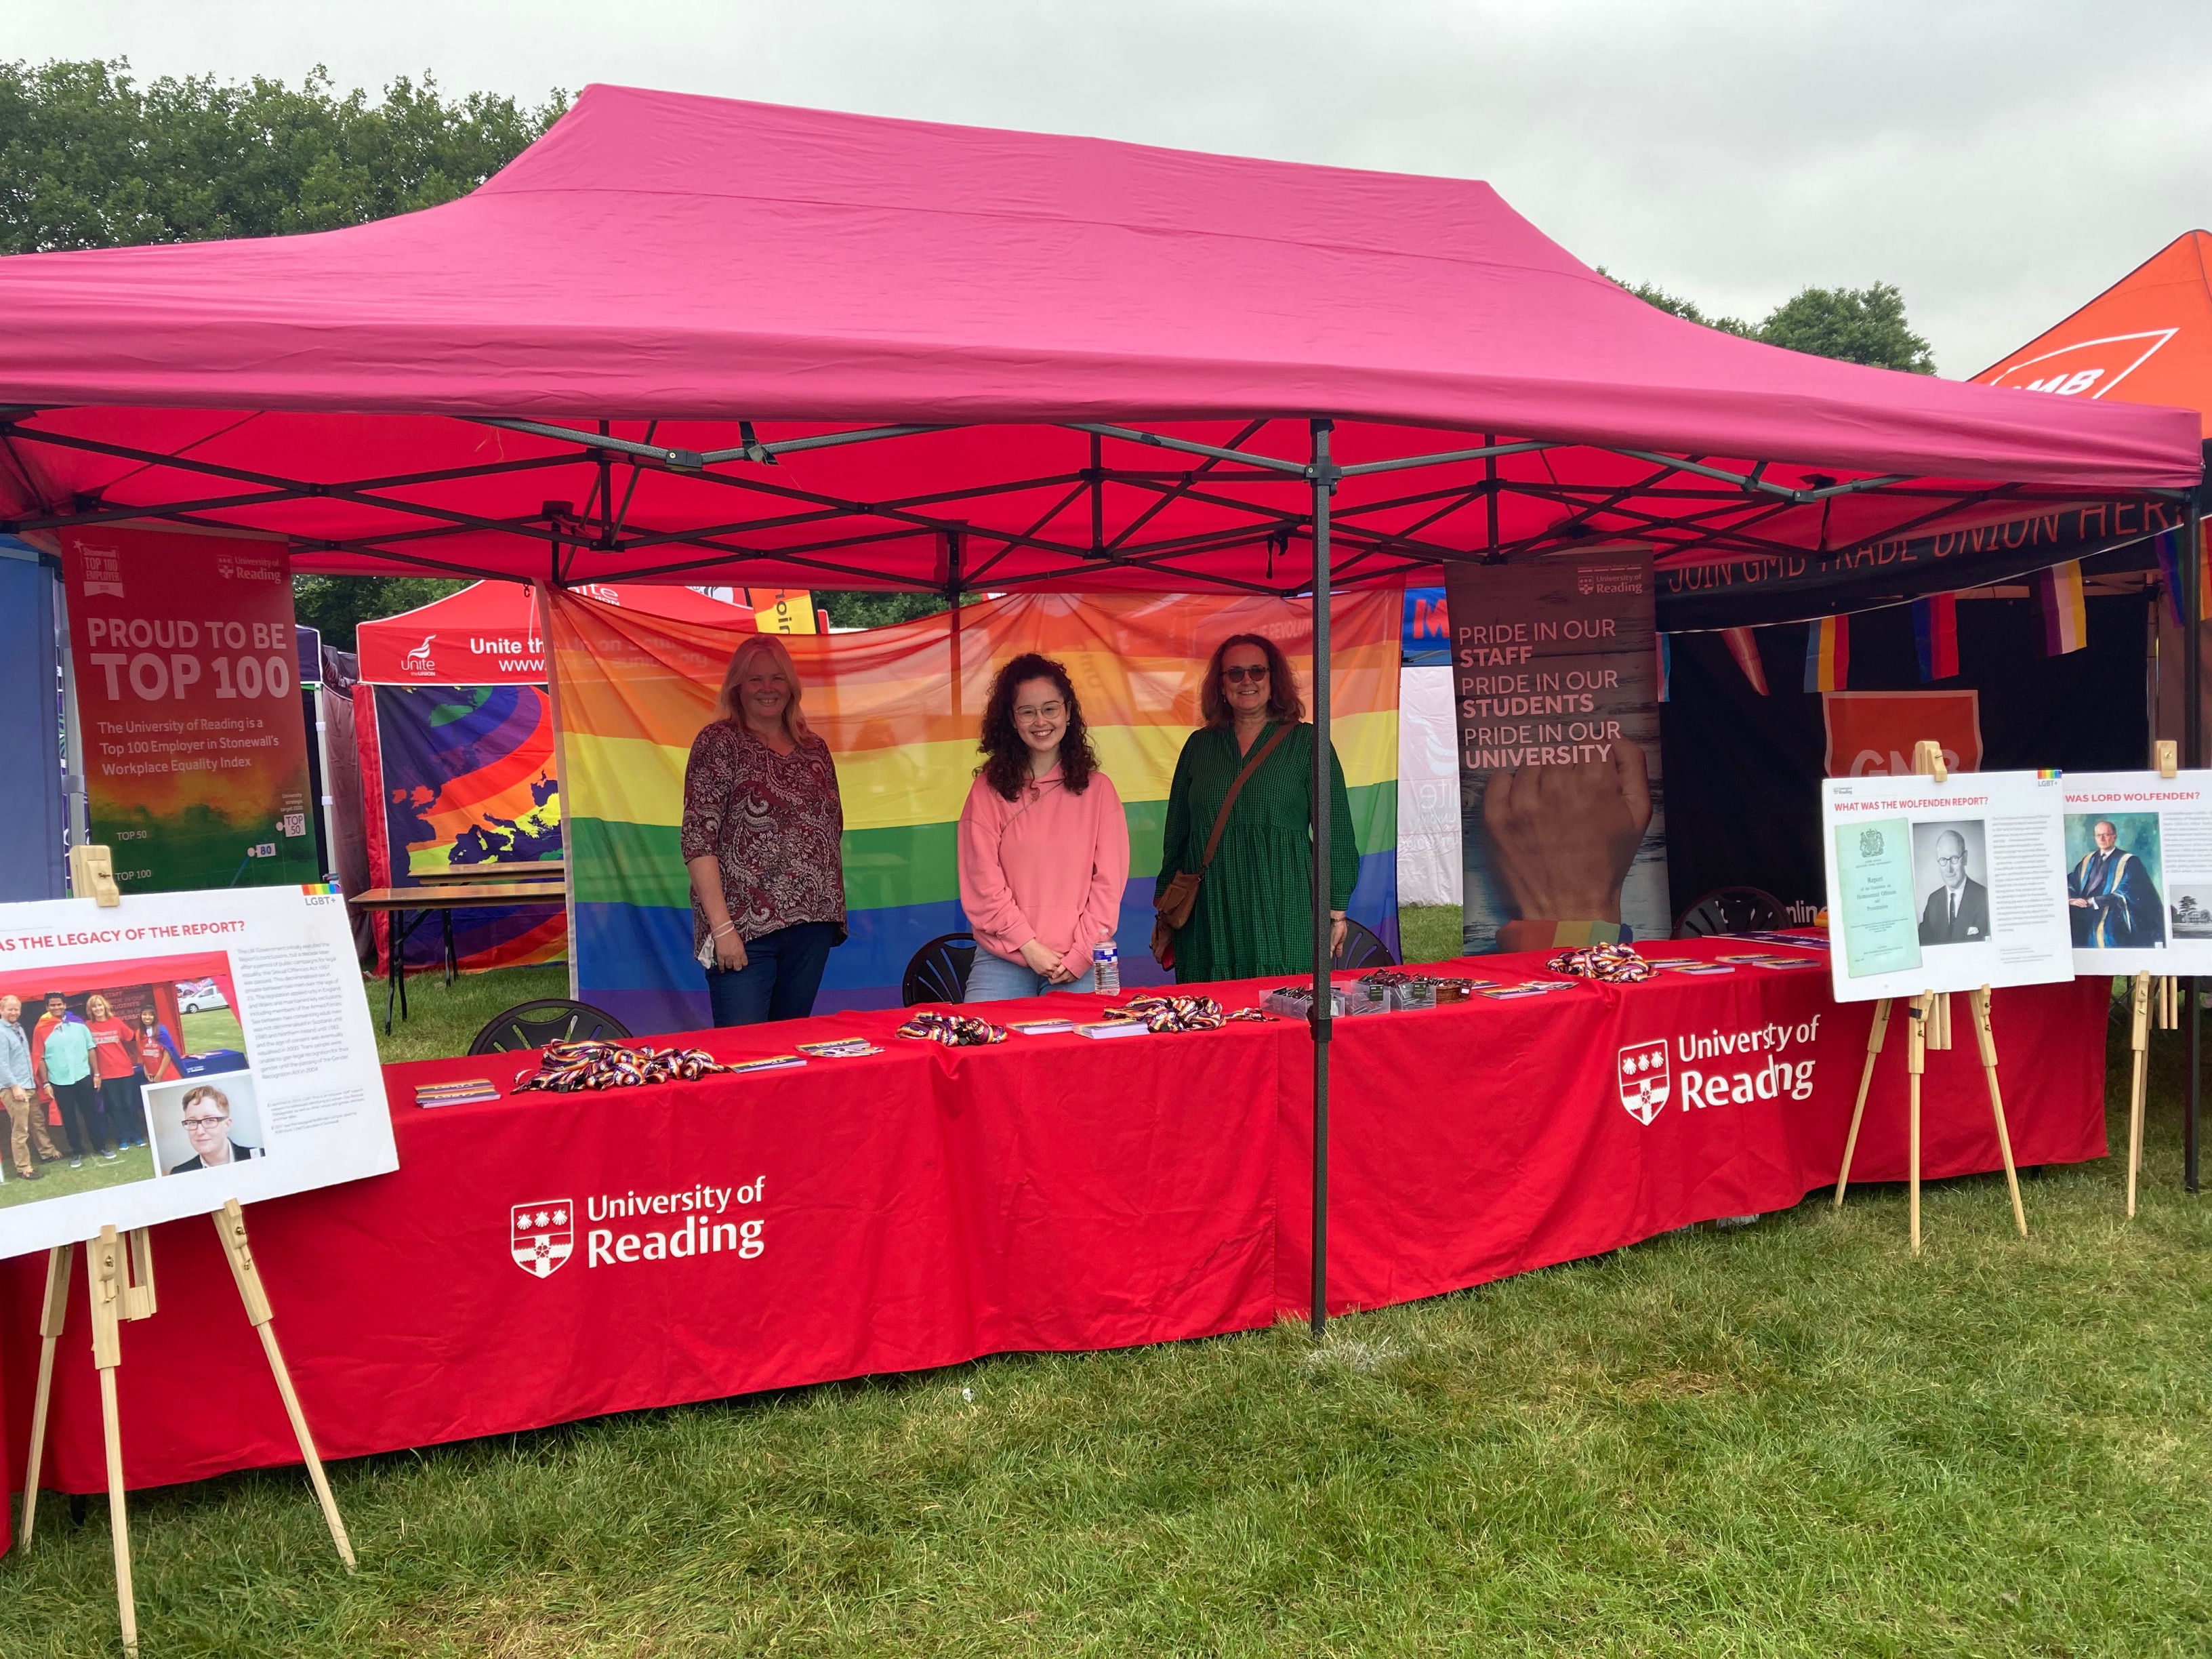  Professor Kat Bicknell, Head of the Department of Pharmacy, Nozomi Tolworthy, Diversity and Inclusion Advisor and Professor Carol Fuller stand under the gazebo at the University of Reading stall. They are standing in front of a table which has a red University of Reading table cloth and is covered with rainbow lanyards, postcards and pronoun badges. 